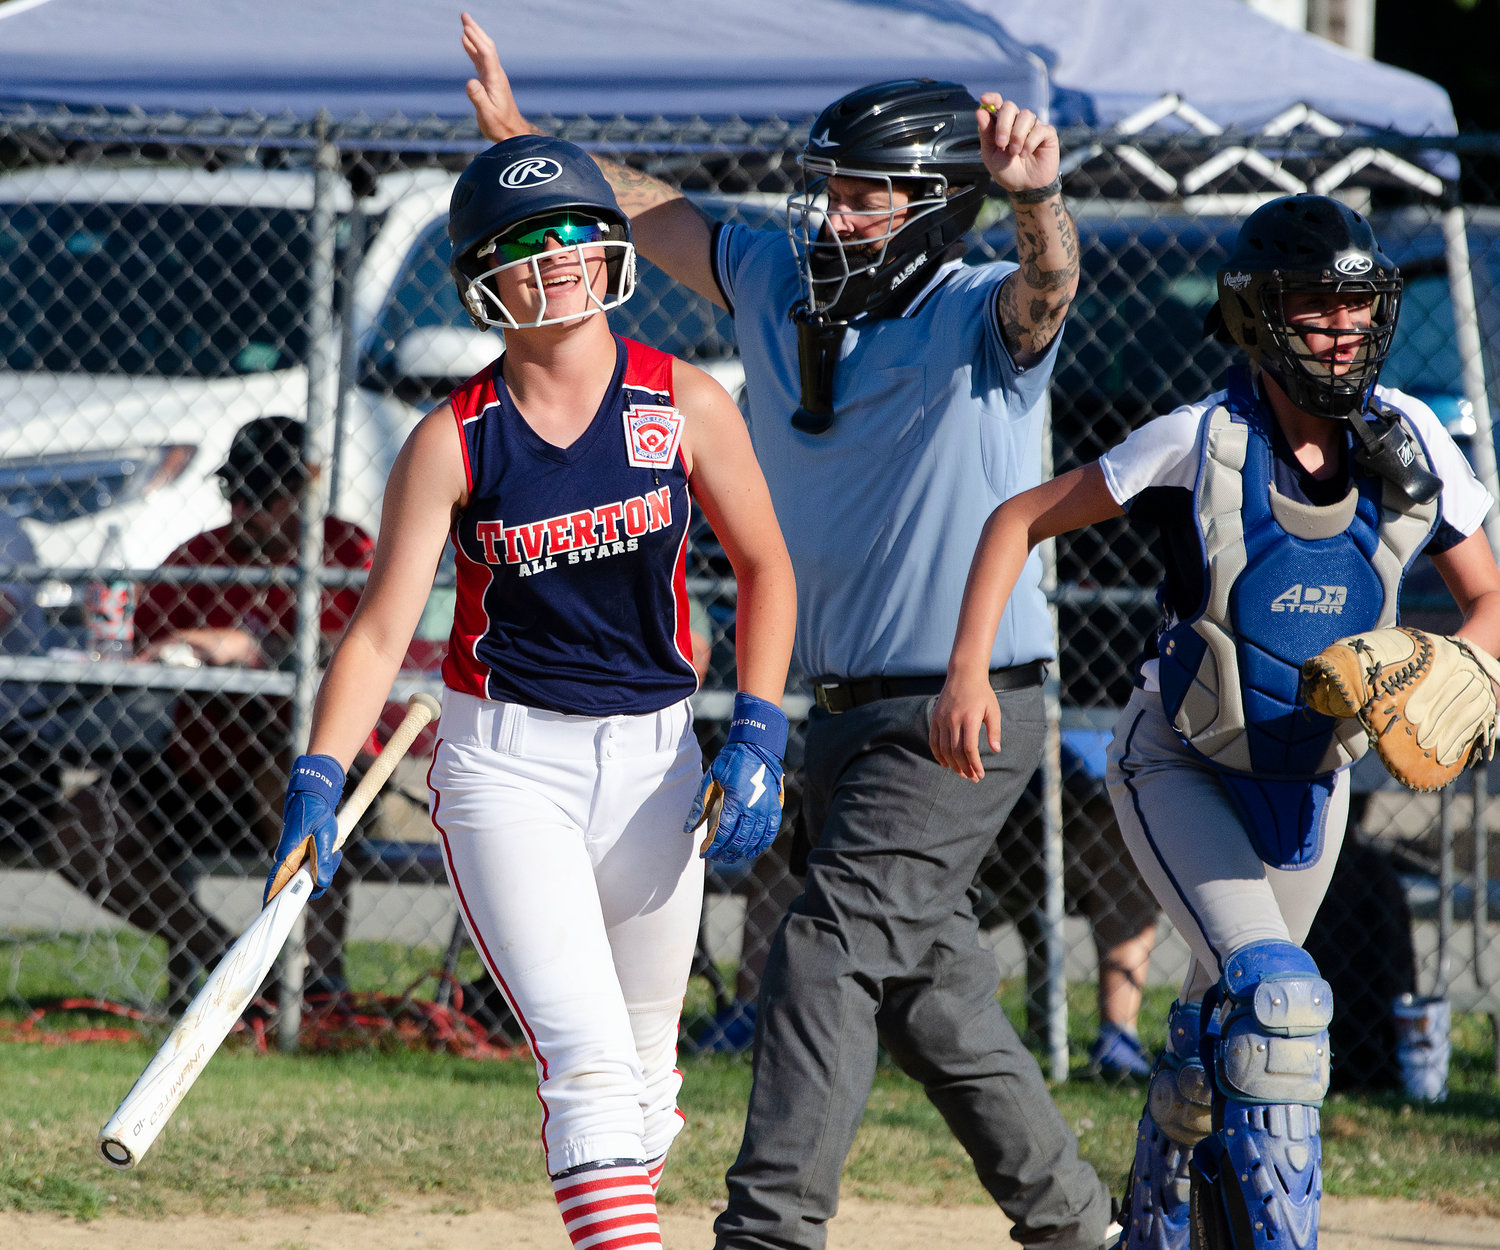 Cleanup hitter Elodie Cannon smiles after getting hit by a pitch during an at bat in game two.